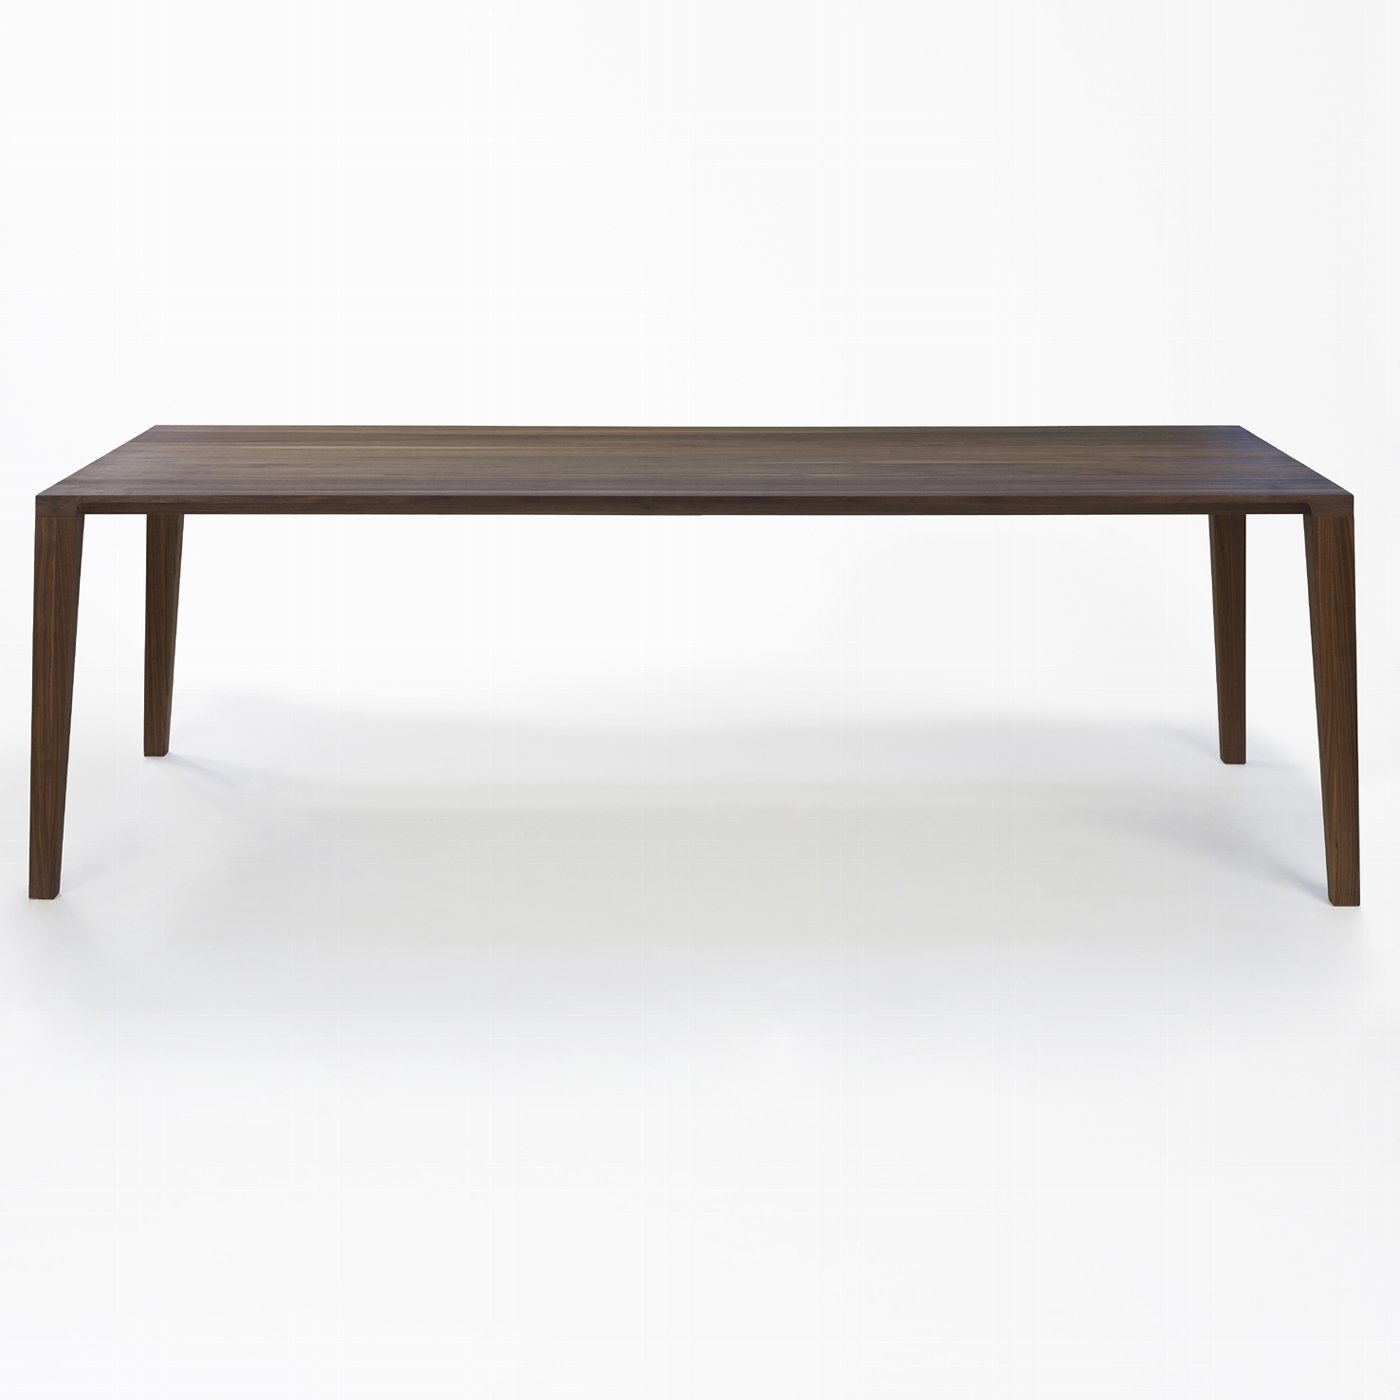 ARACOL table walnut solid oiled